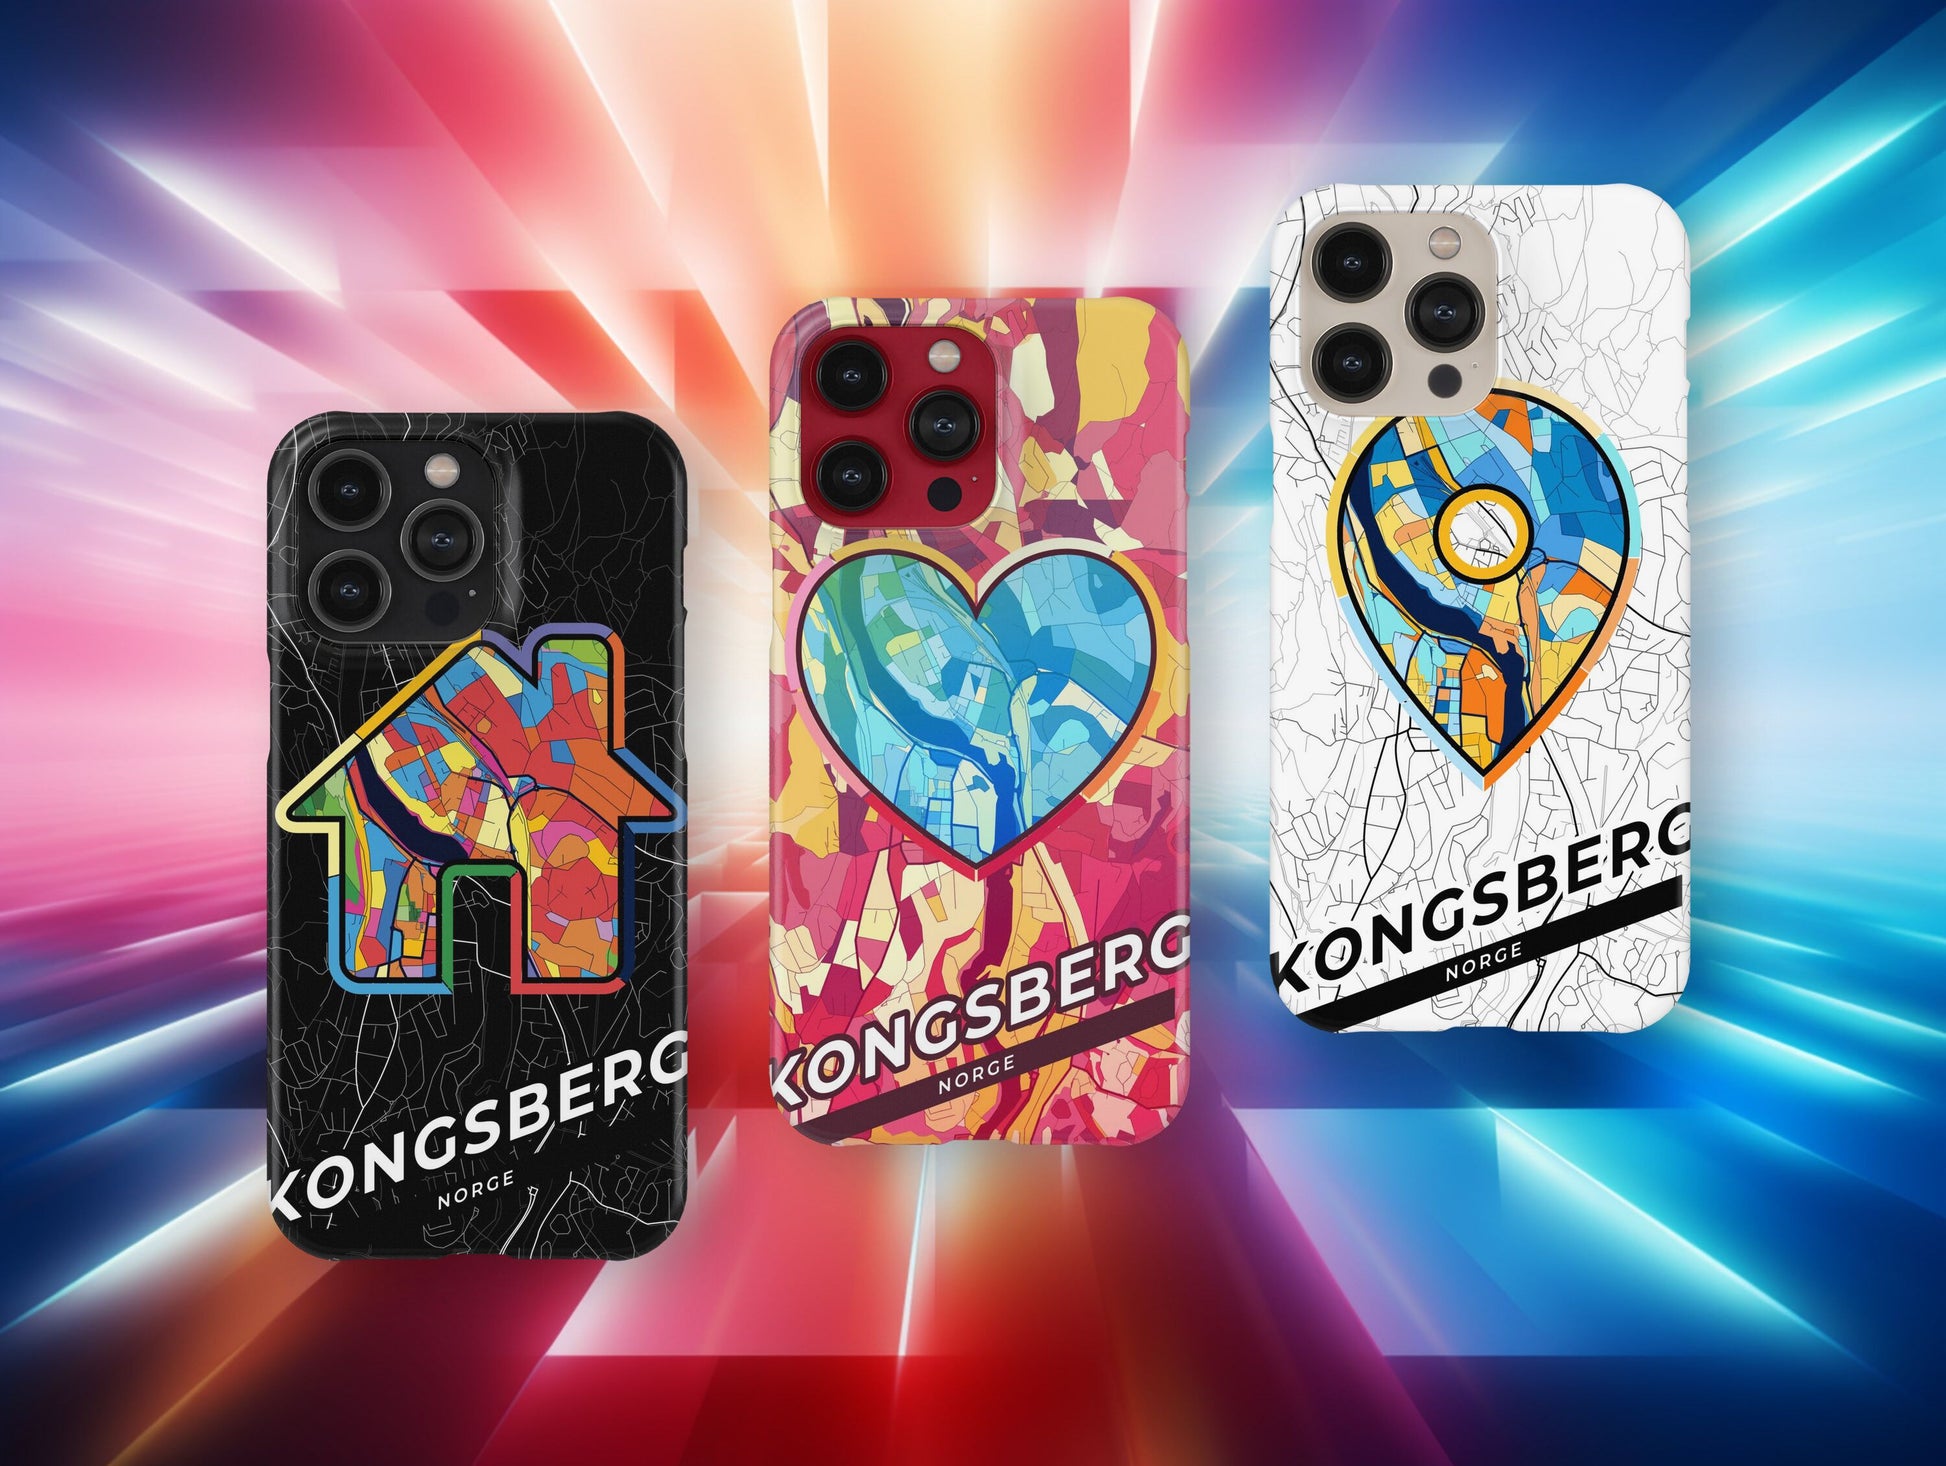 Kongsberg Norway slim phone case with colorful icon. Birthday, wedding or housewarming gift. Couple match cases.